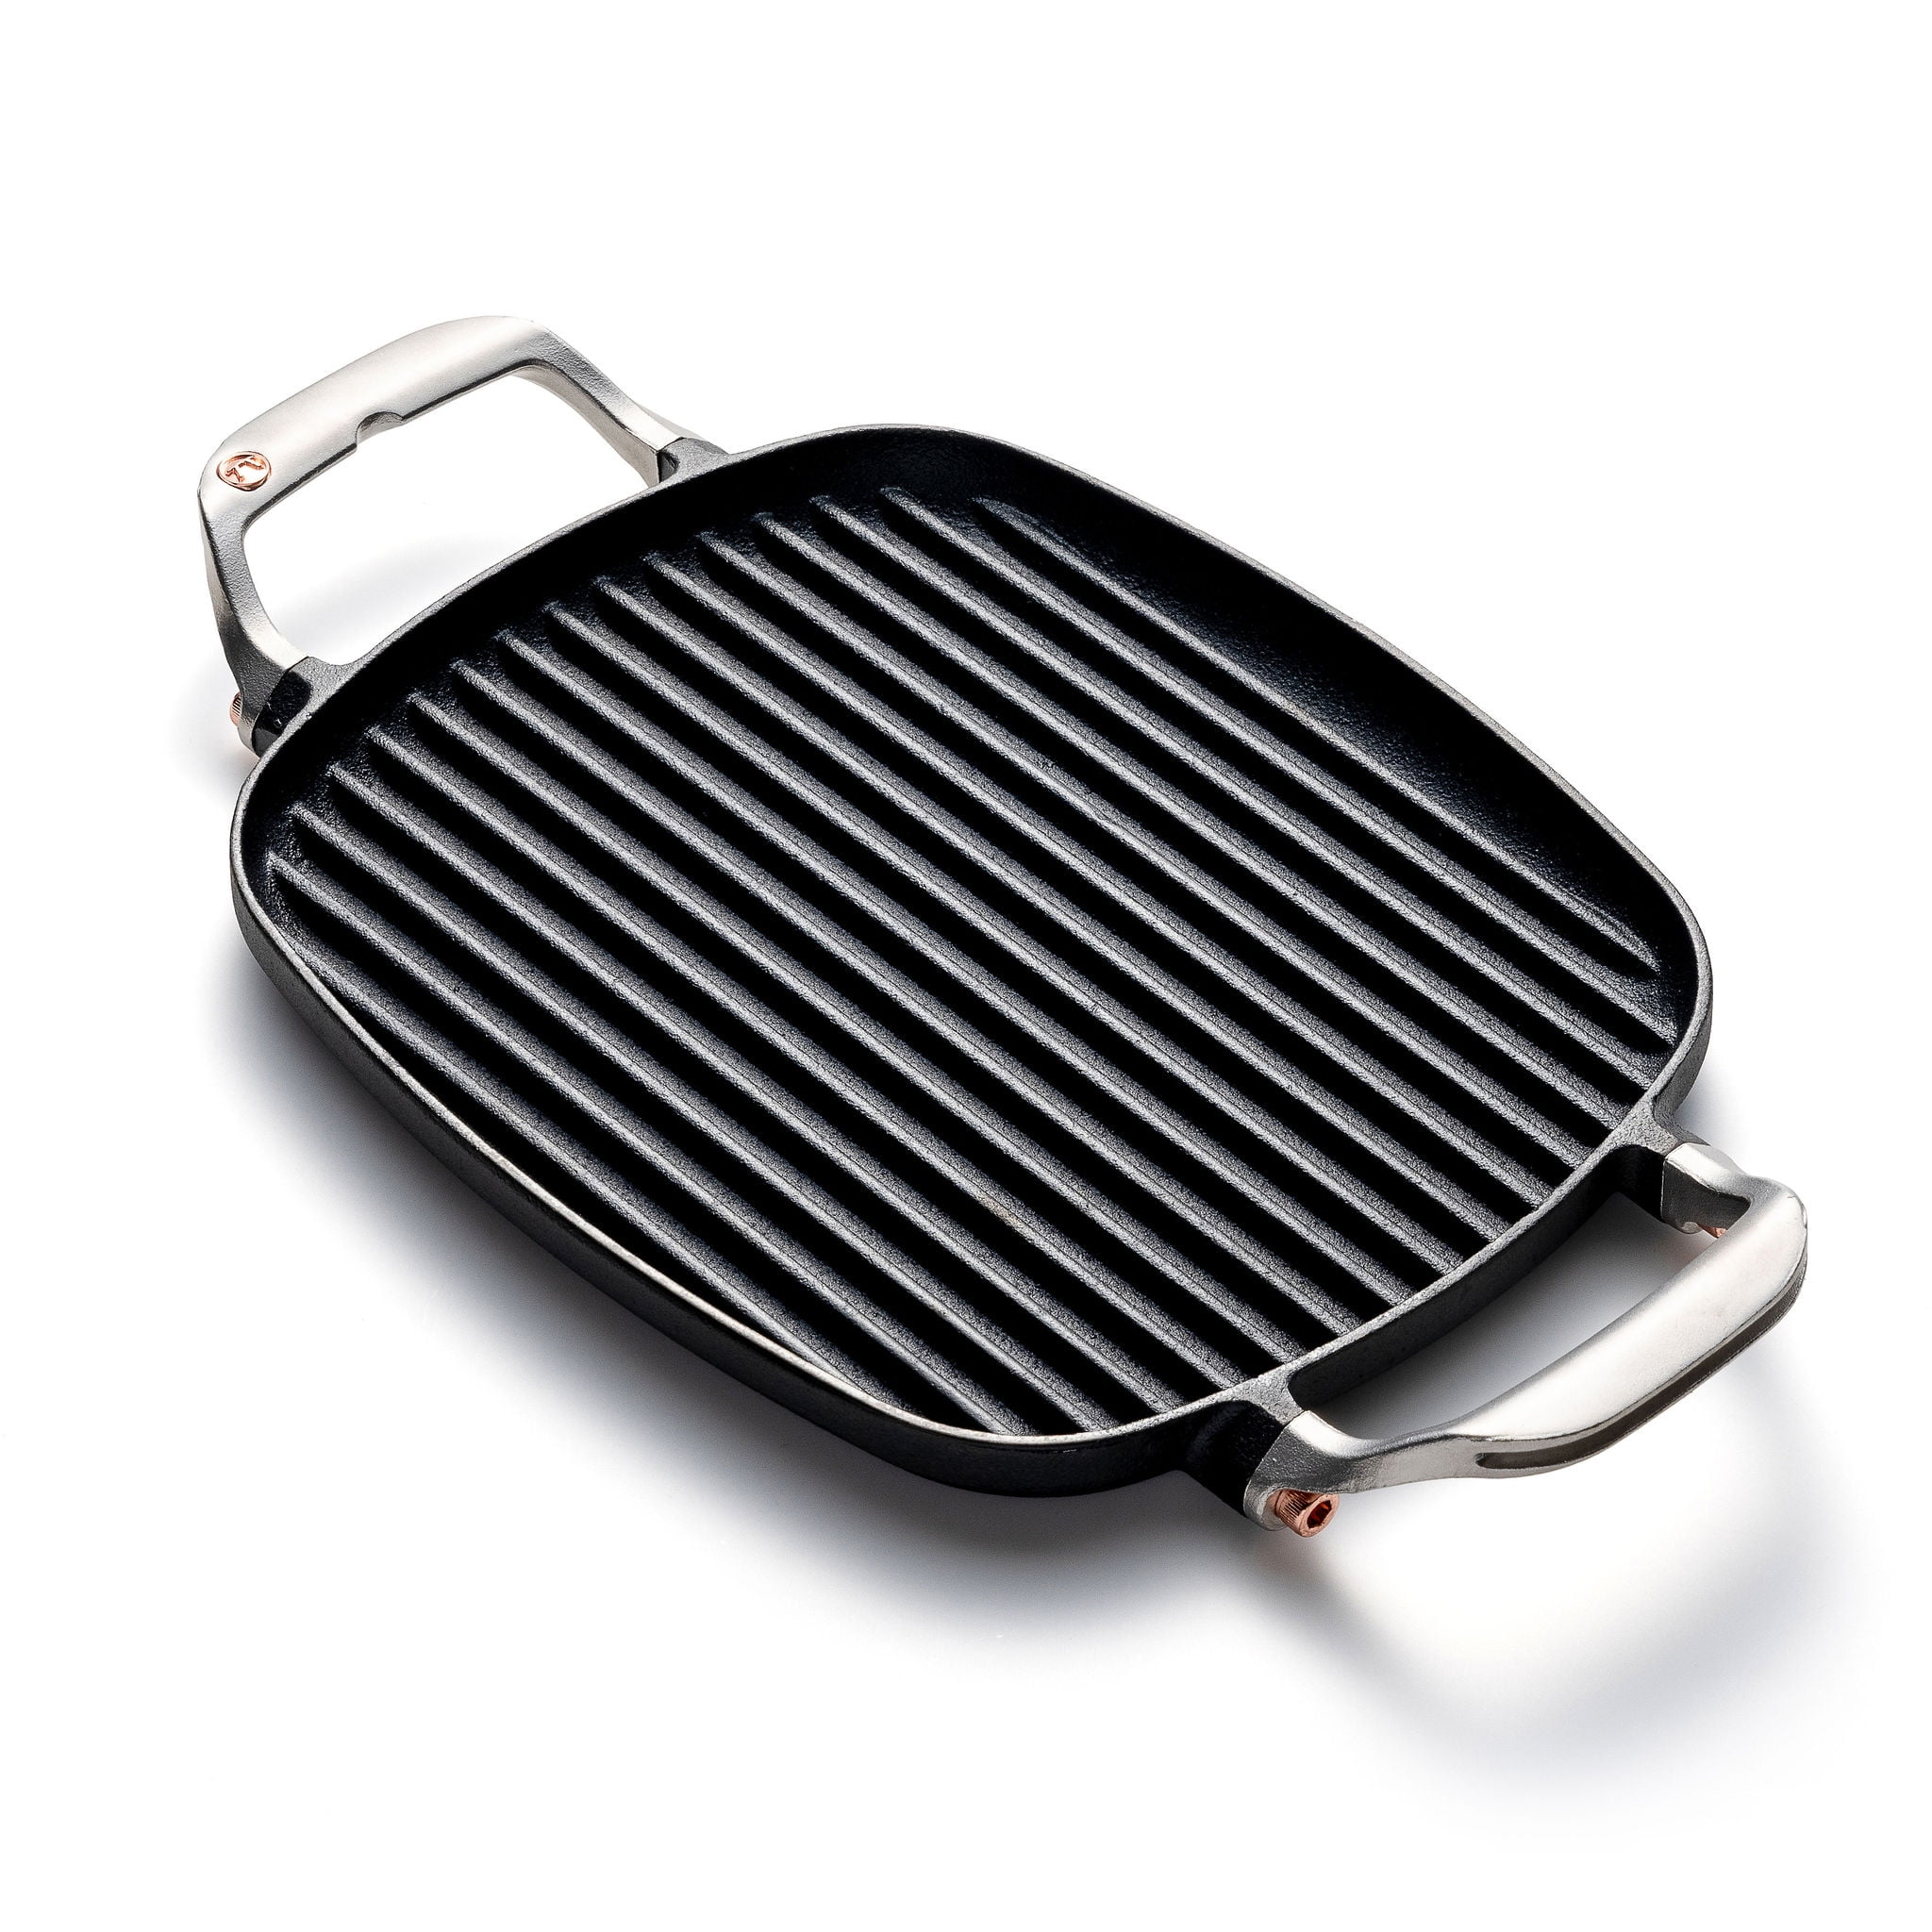 LAVA CAST IRON Lava Enameled Cast Iron Skillet 10 inch-3-Compartment Frying  Grill Pan Self Handled Rectangle